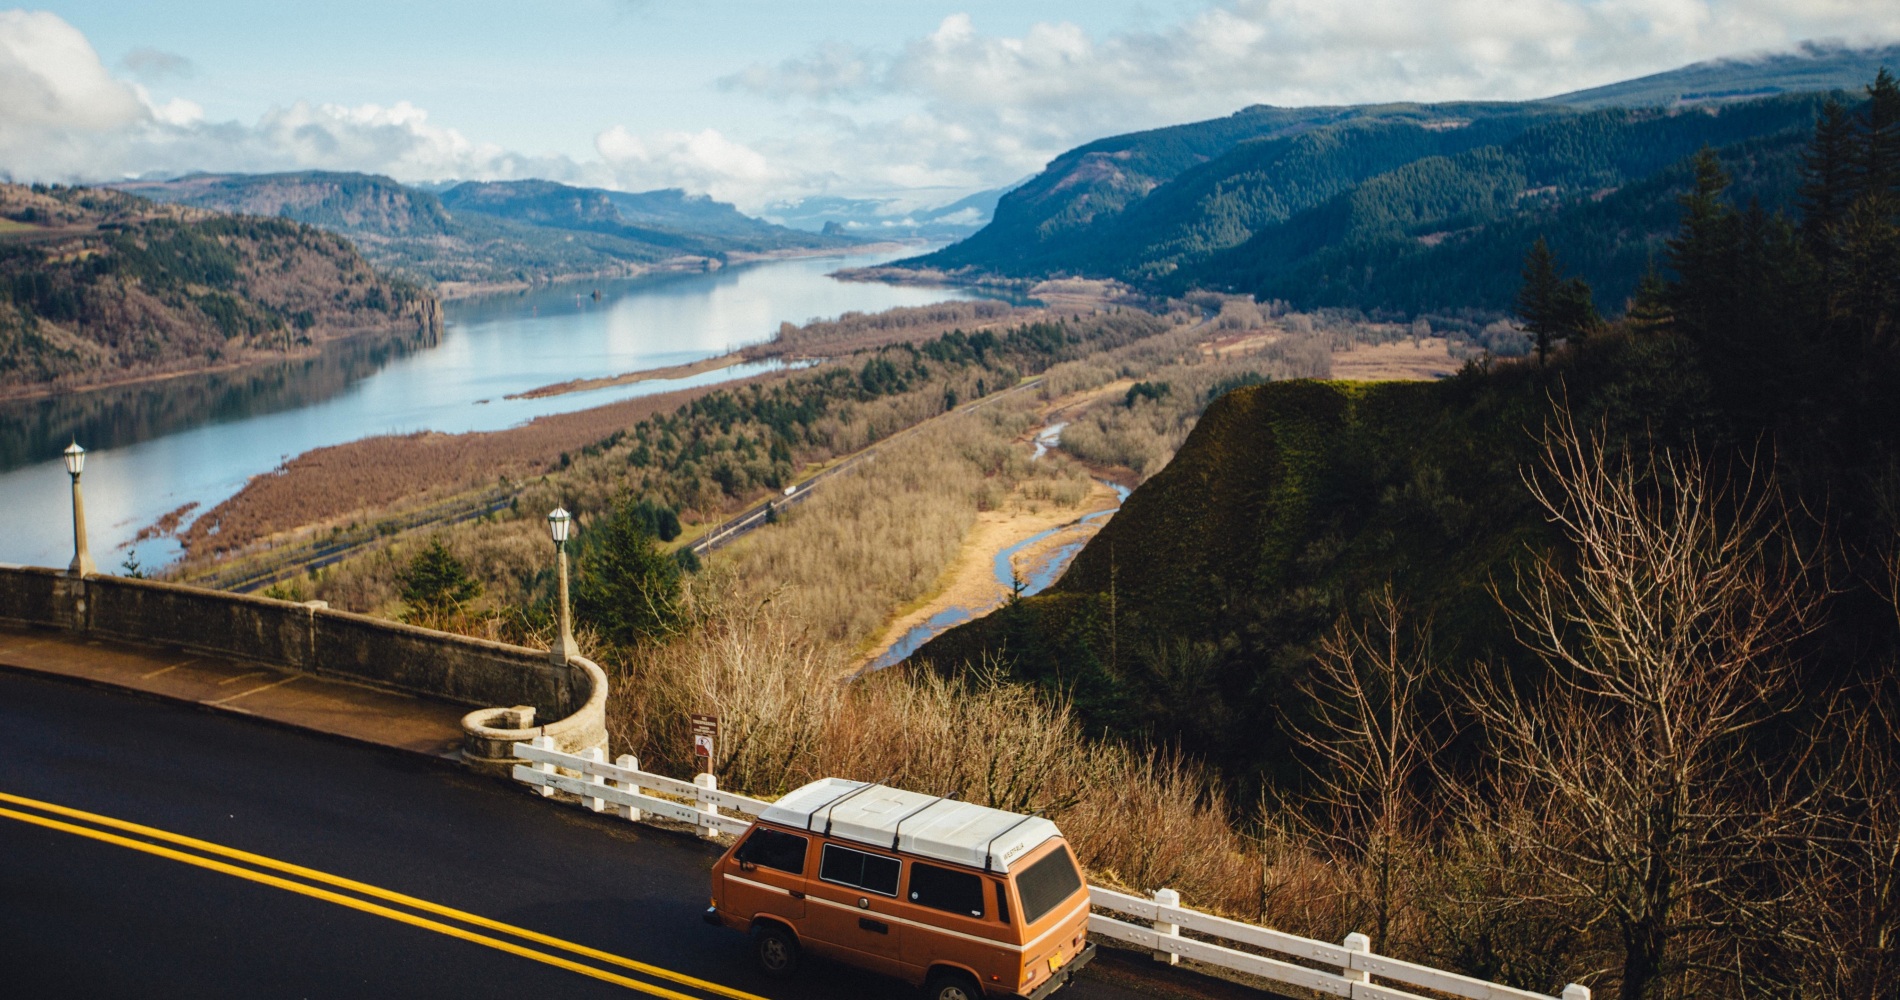 5 Epic American Road Trips